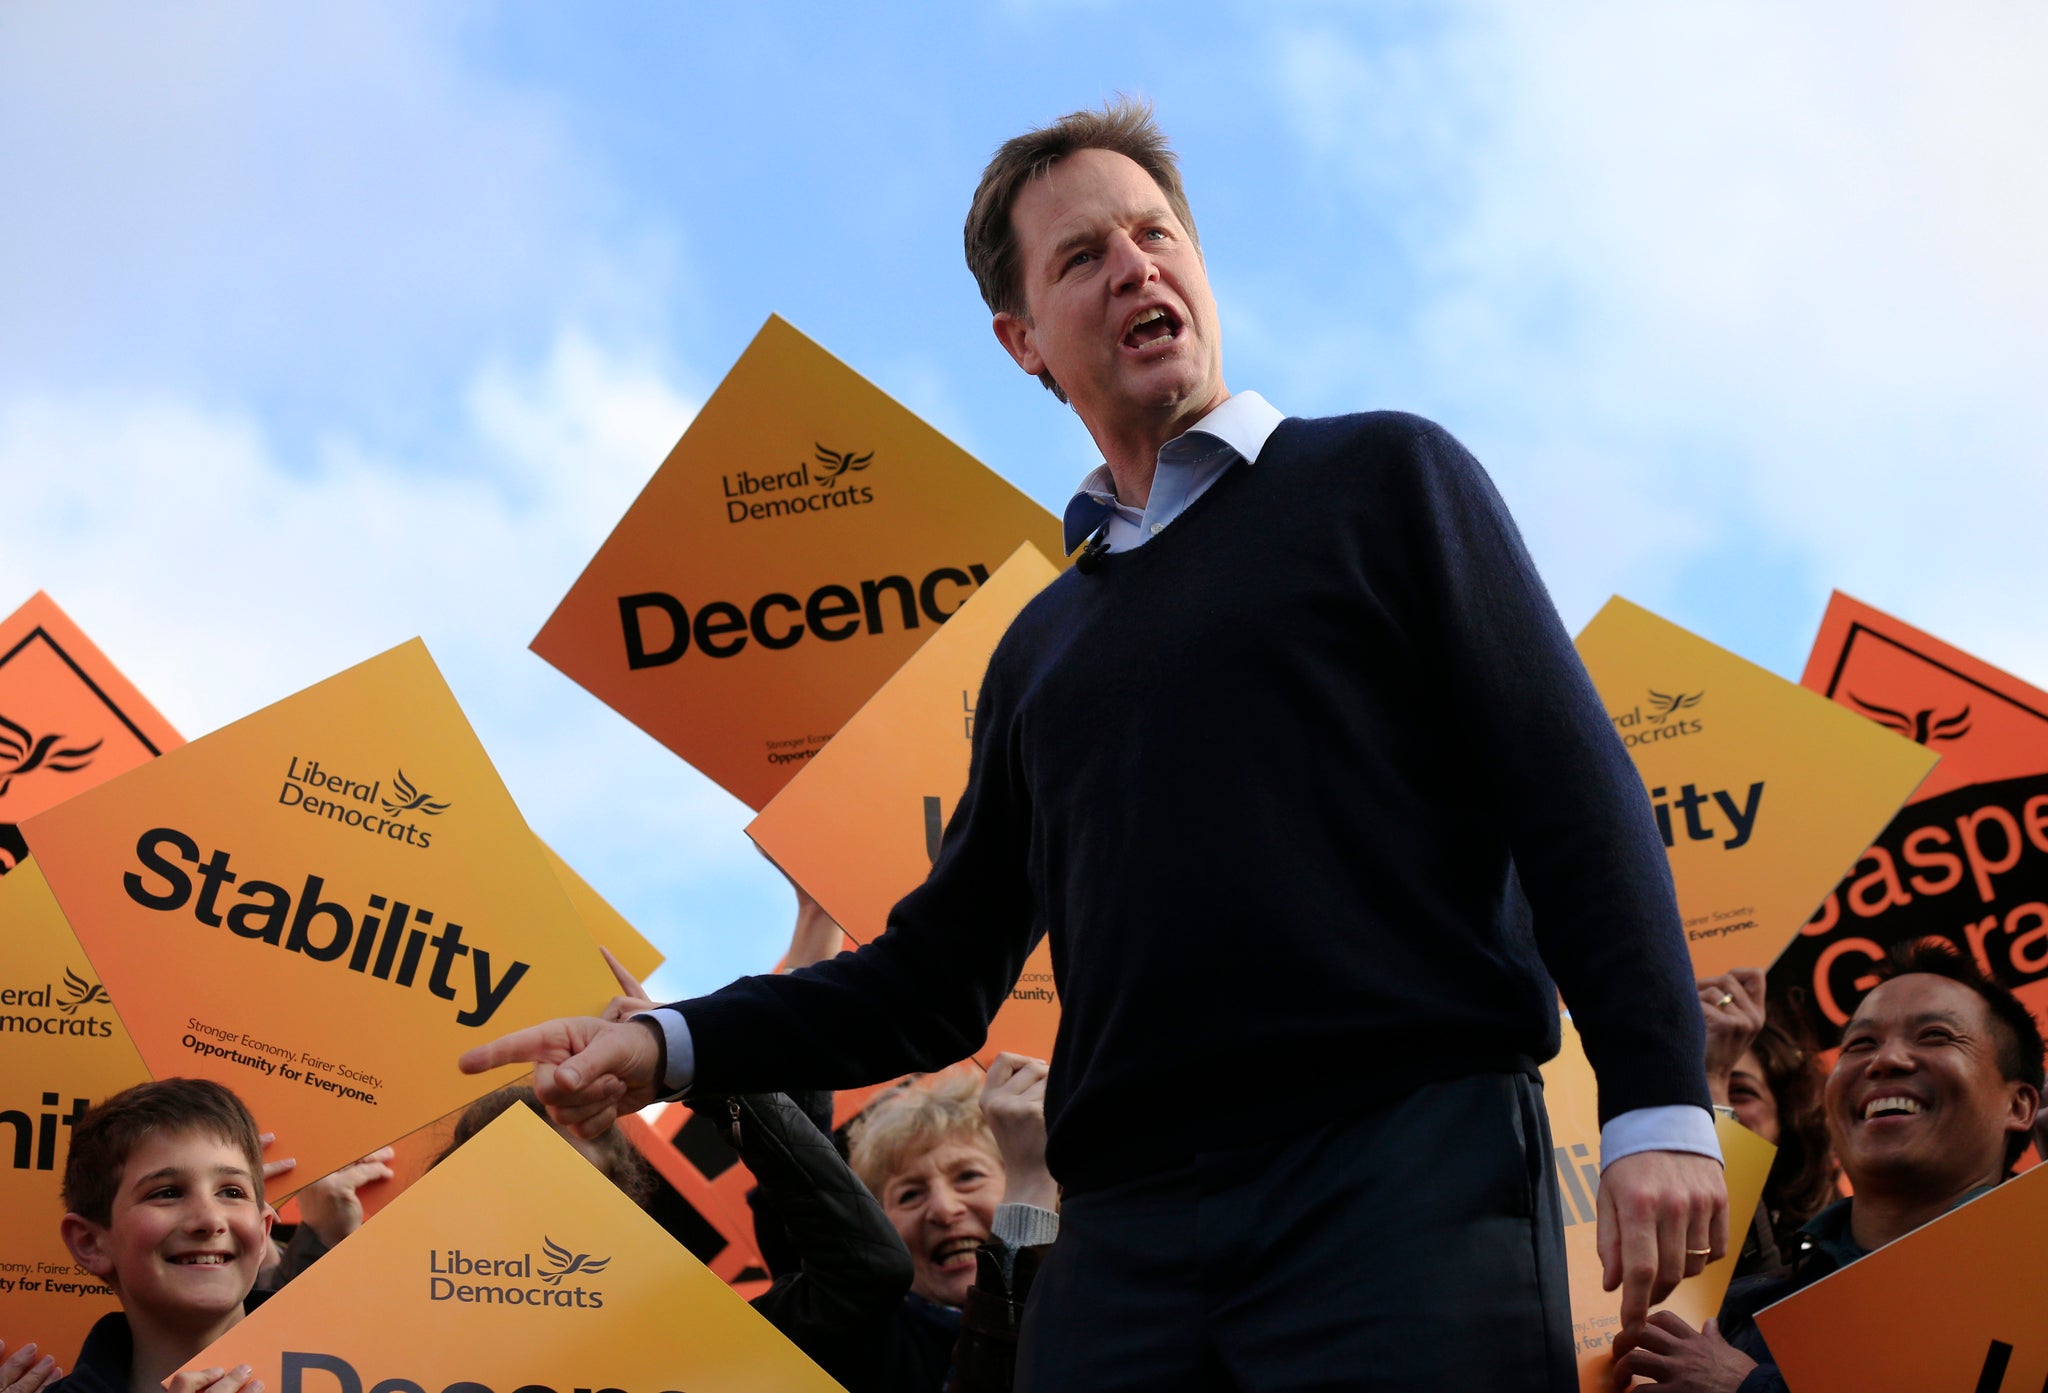 Nick Clegg speaking to a friendly crowd